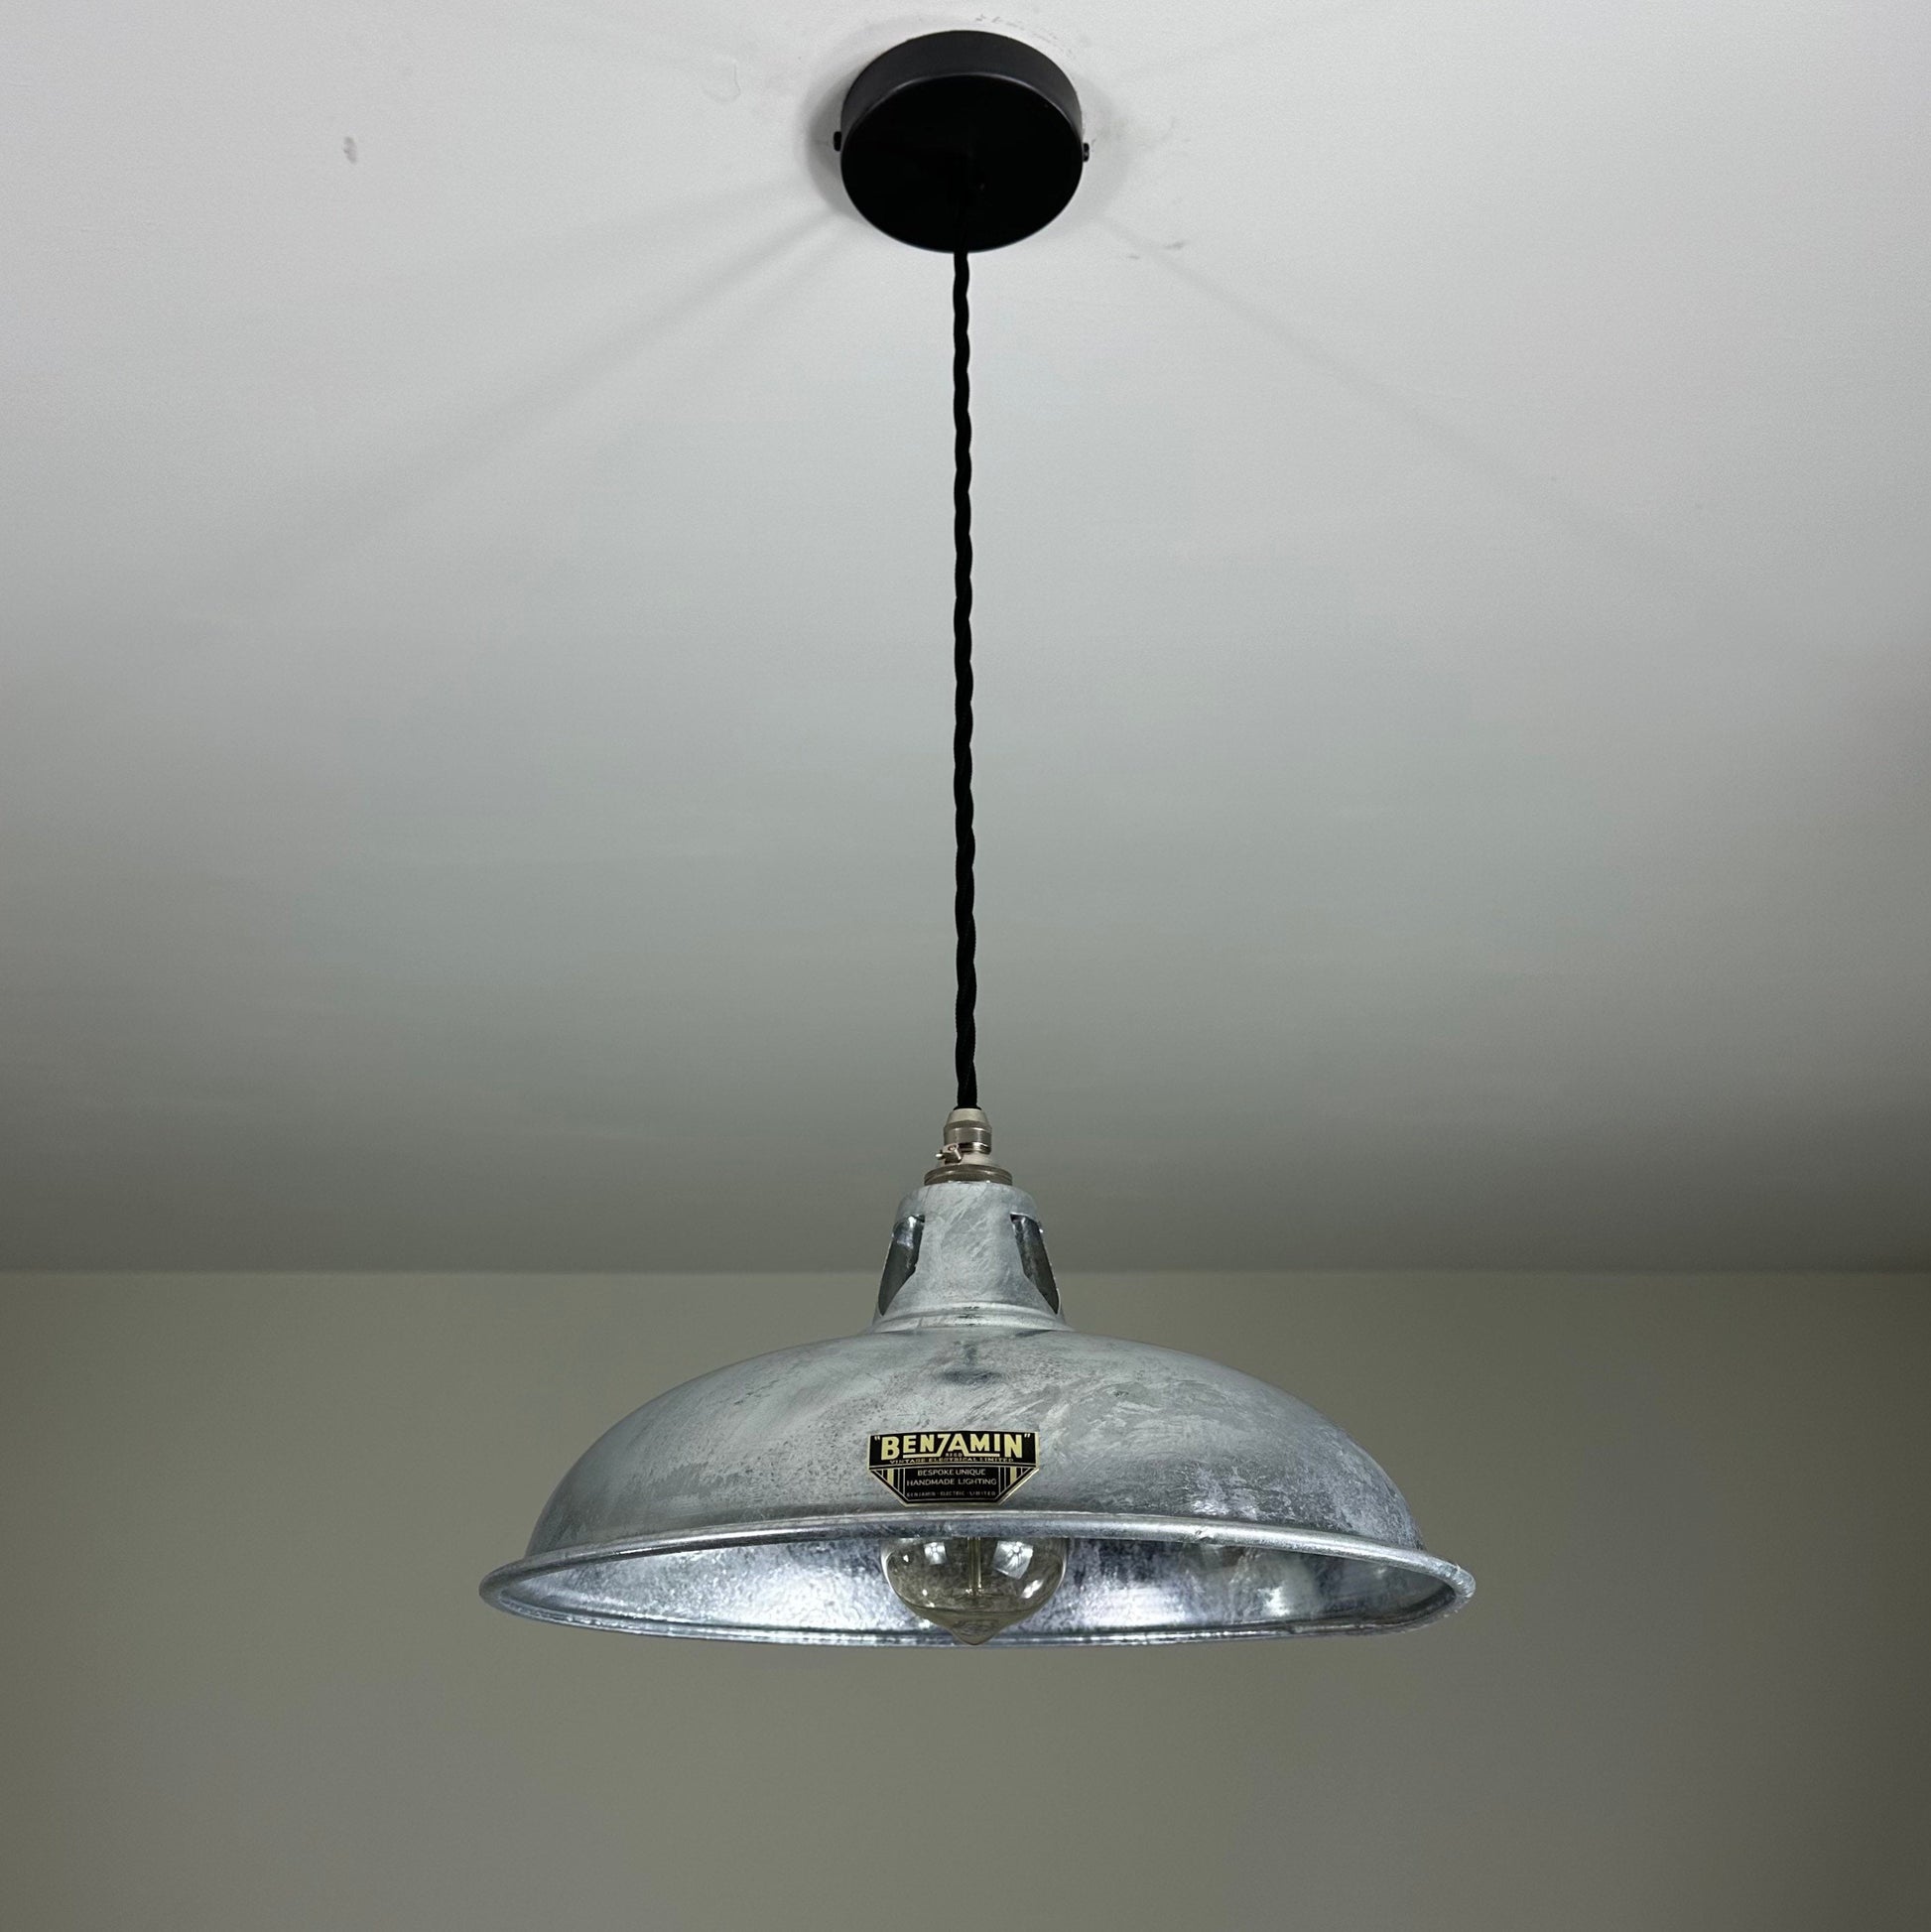 Sedgeford Coolie ~ Galvanised Solid SteeI Industrial Shade Pendant Set Light | Ceiling Dining Room | Kitchen Table | Vintage Filament Bulb